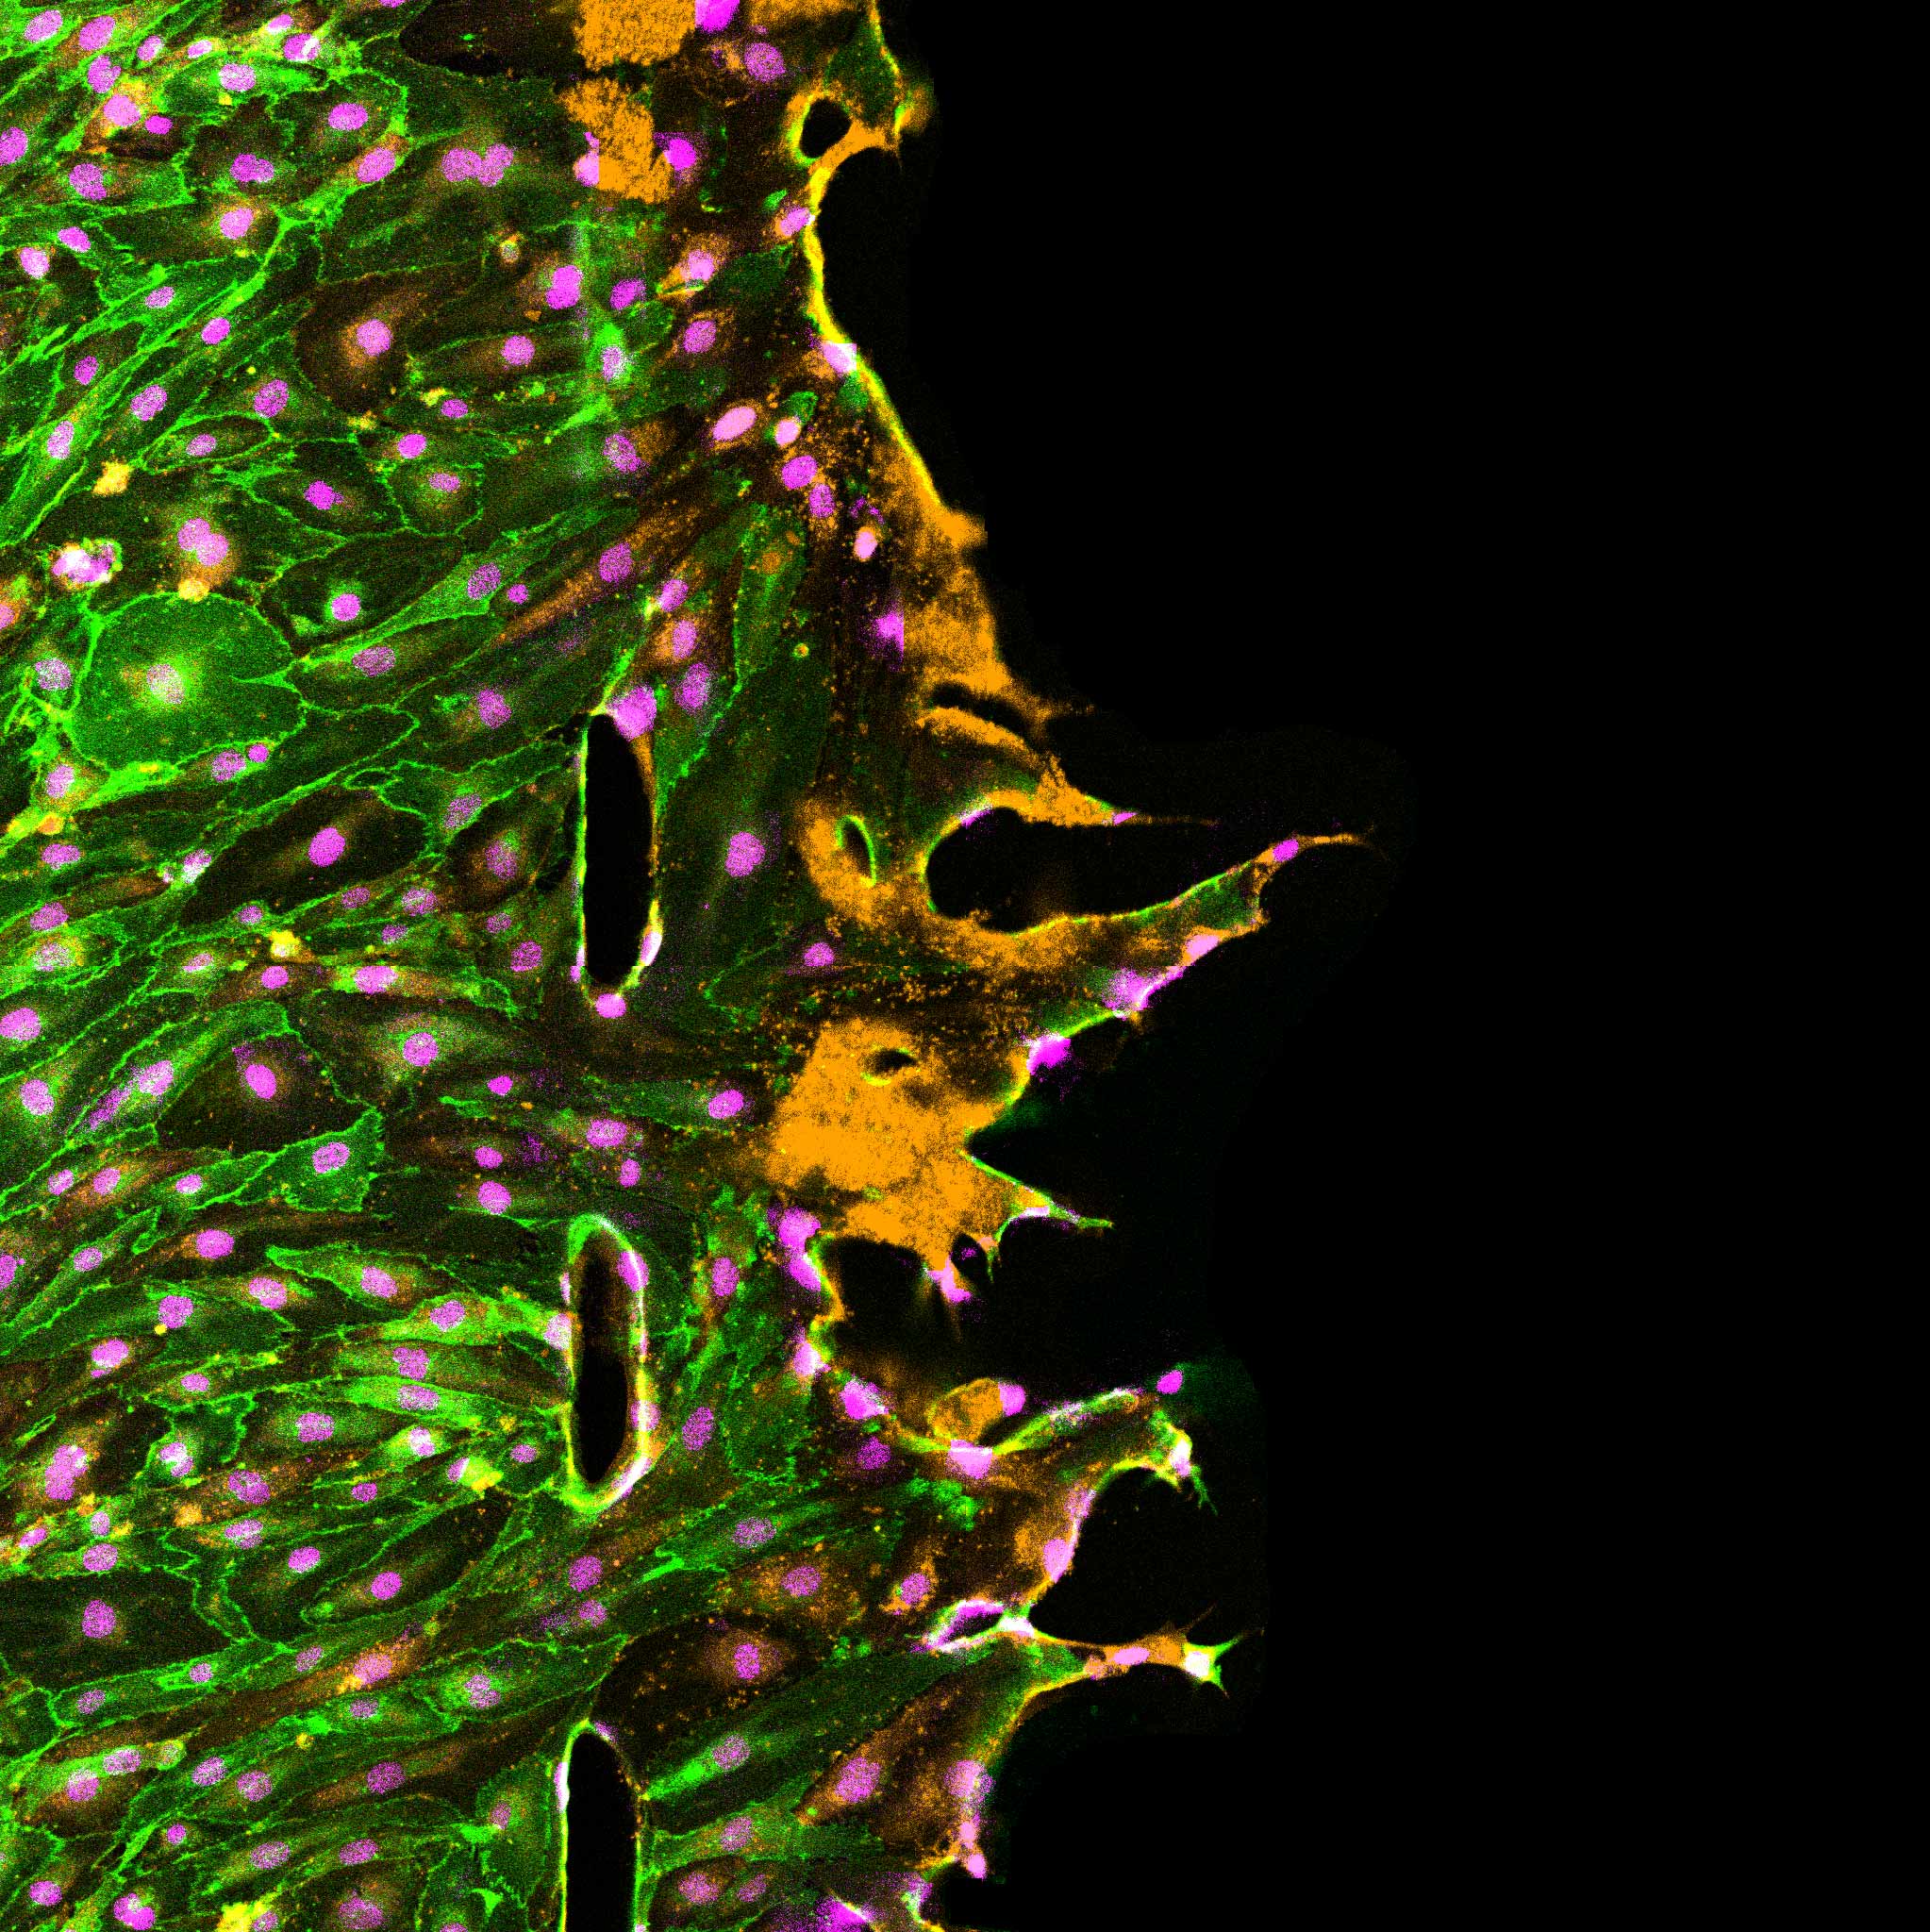 An artwork where new vessel sprouts from capillary, green endothelial cells and orange blood platelets.